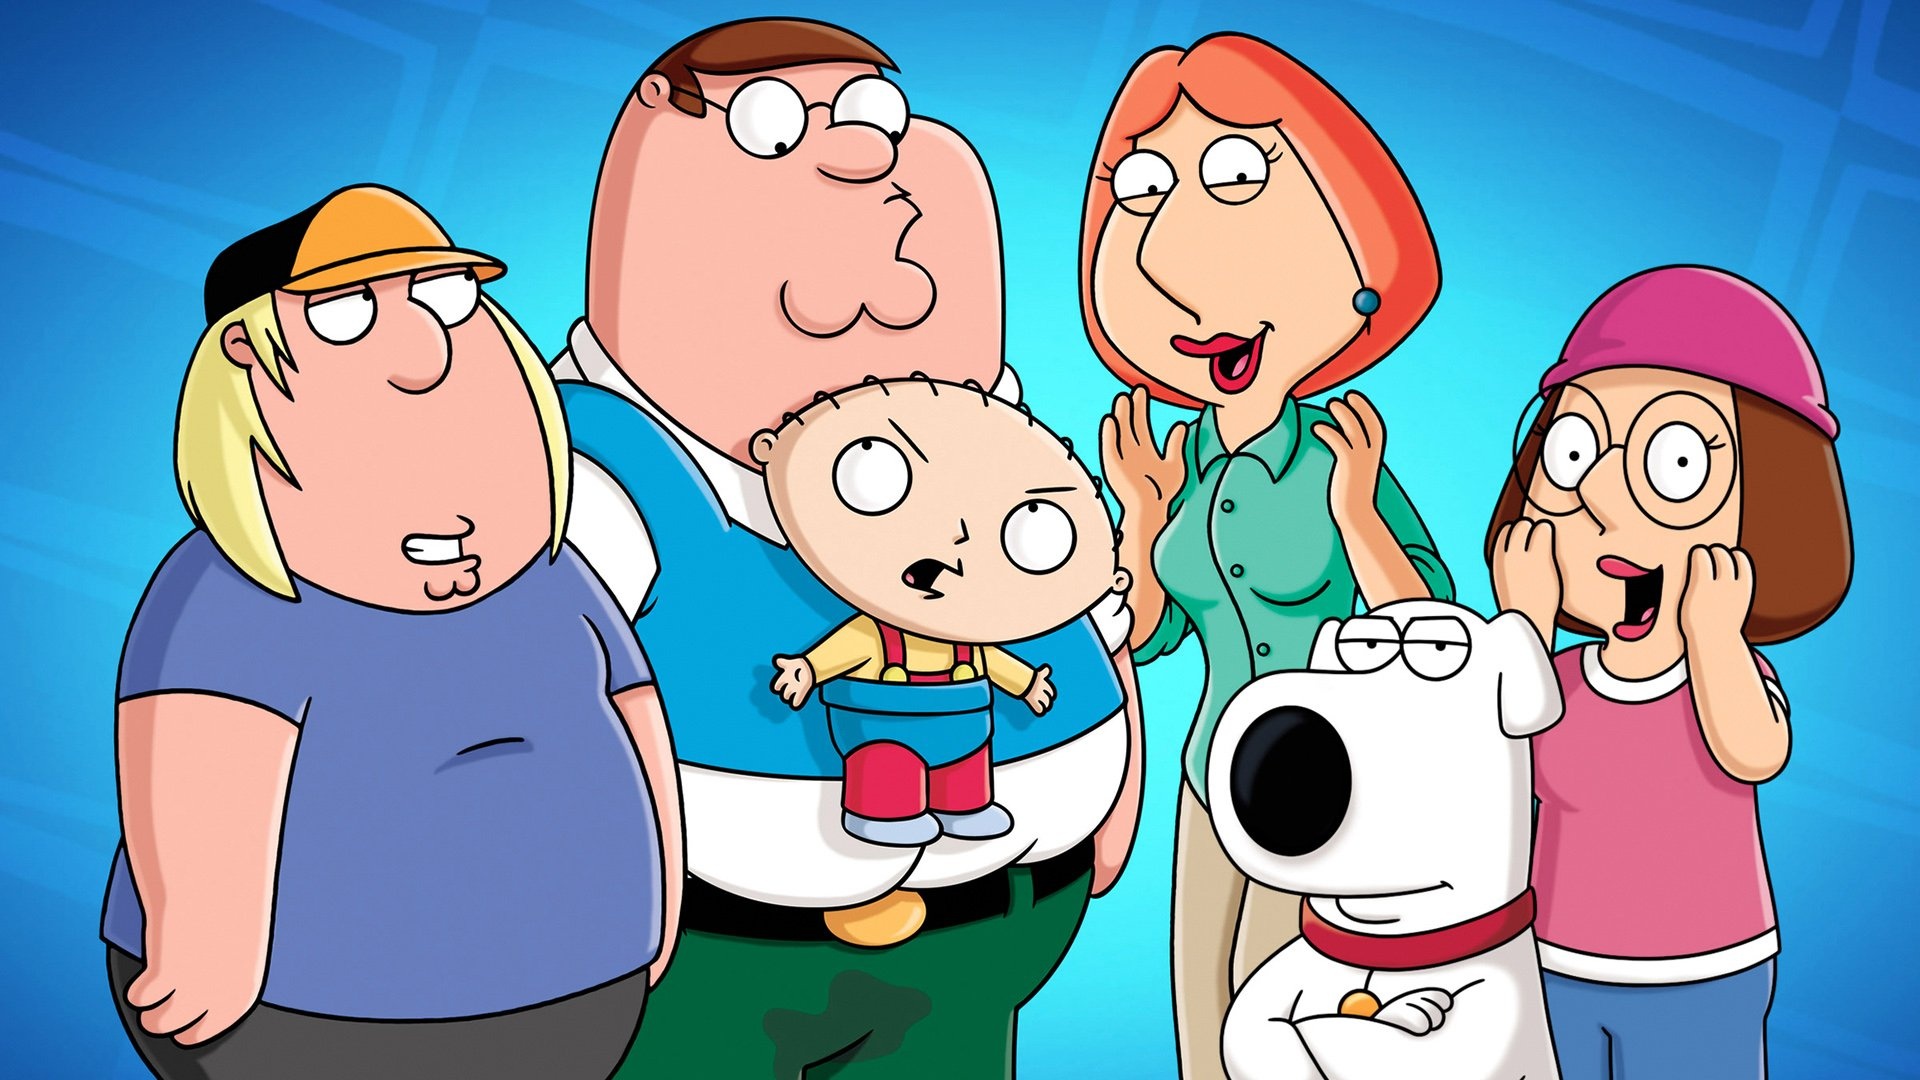 Family Guy cartoon, Hilarious moments, Funny characters, Animated comedy, 1920x1080 Full HD Desktop